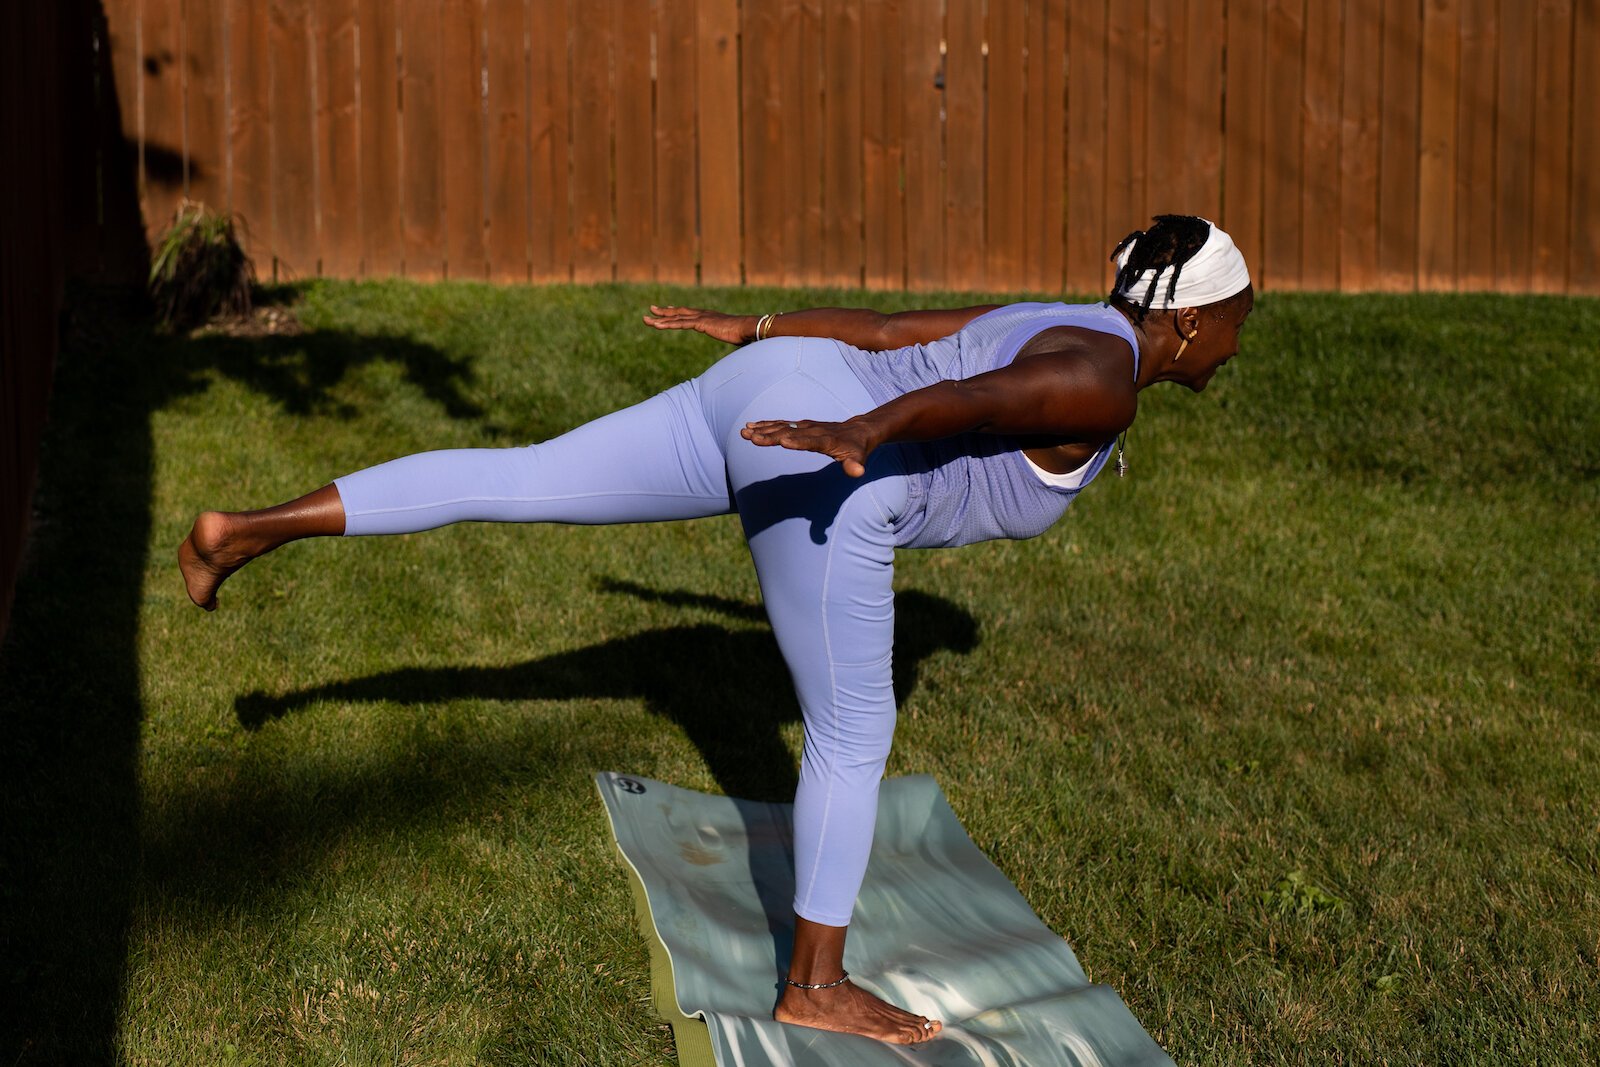 Diane Rogers, a longtime resident and current President of the Oxford Community Association, leads a yoga class in her backyard for her neighborhood and community drop-ins.